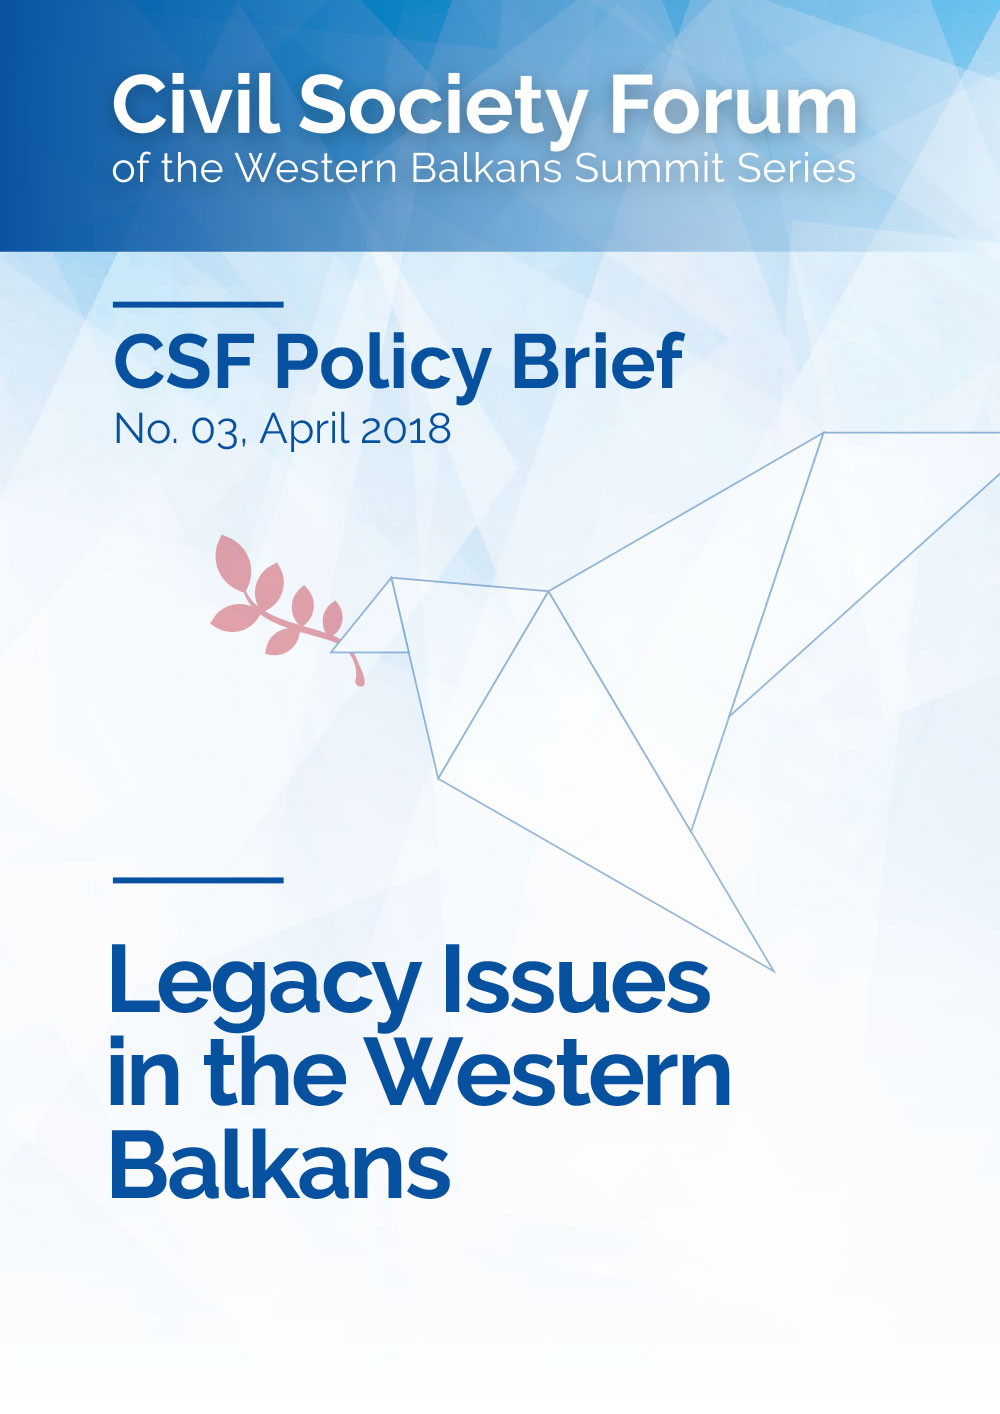 Legacy Issues in the Western Balkans